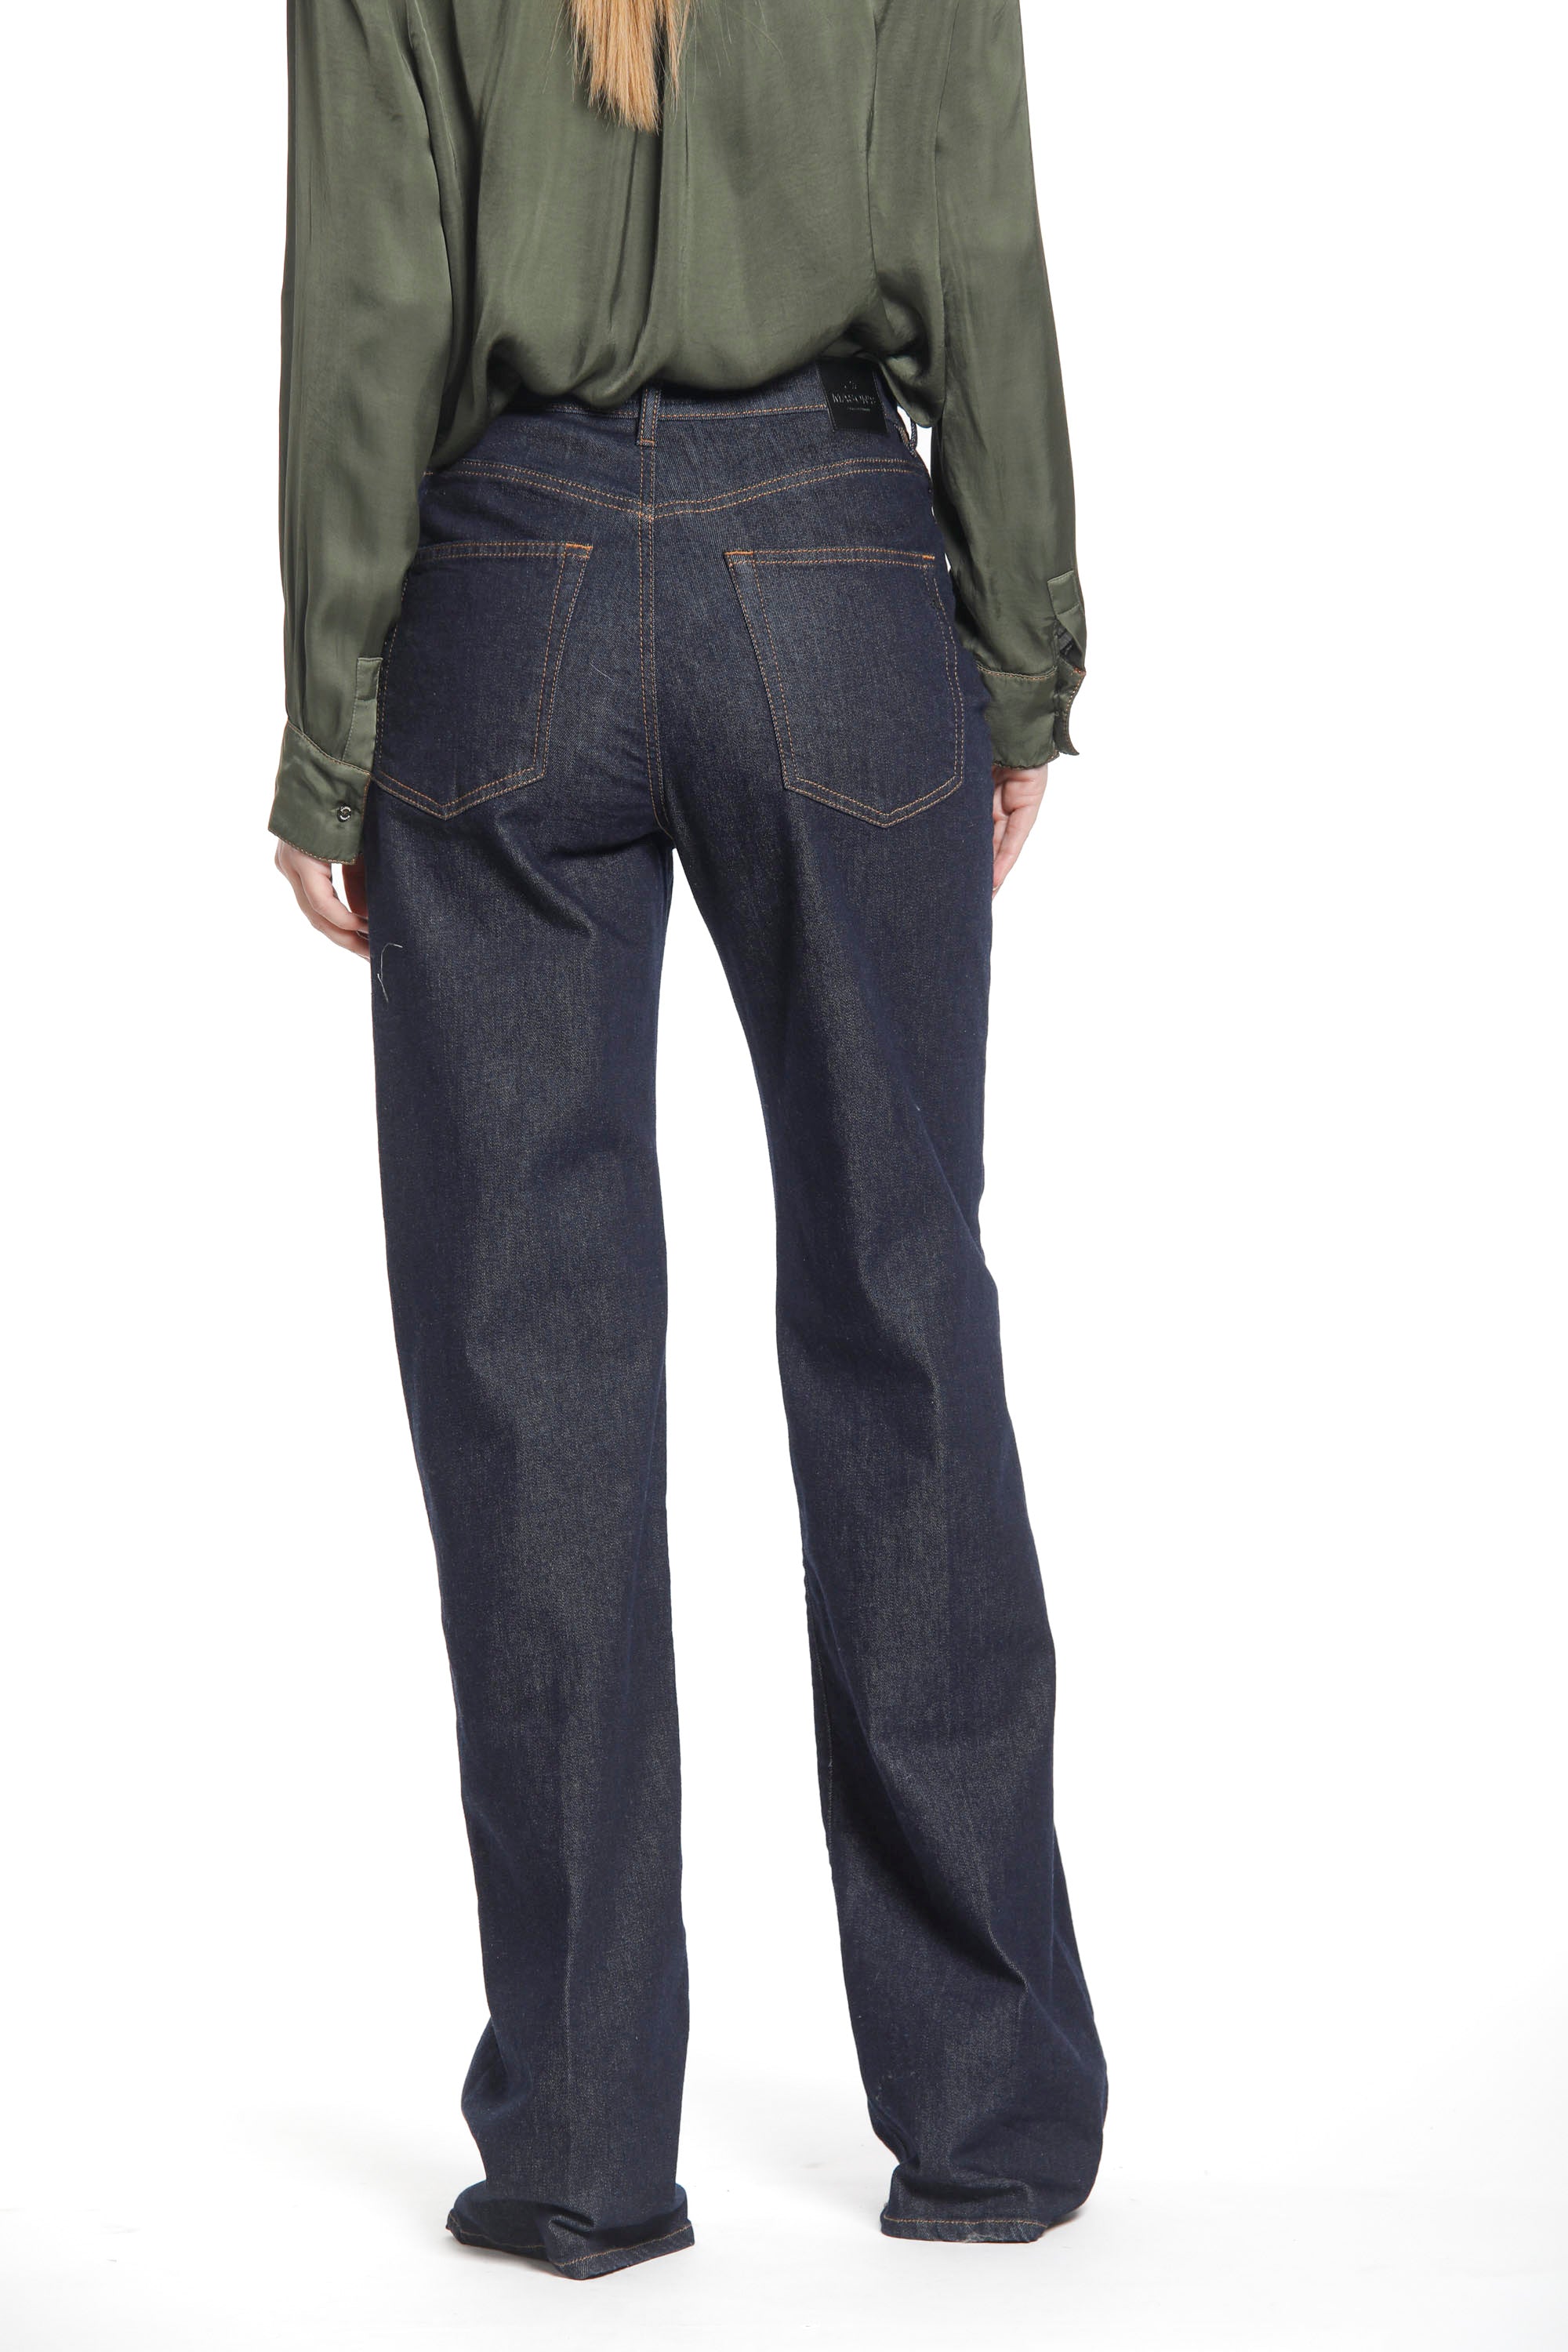 Image 6 of woman's 5-pocket pants in stretch denim colour navy blue Sienna model by Mason's